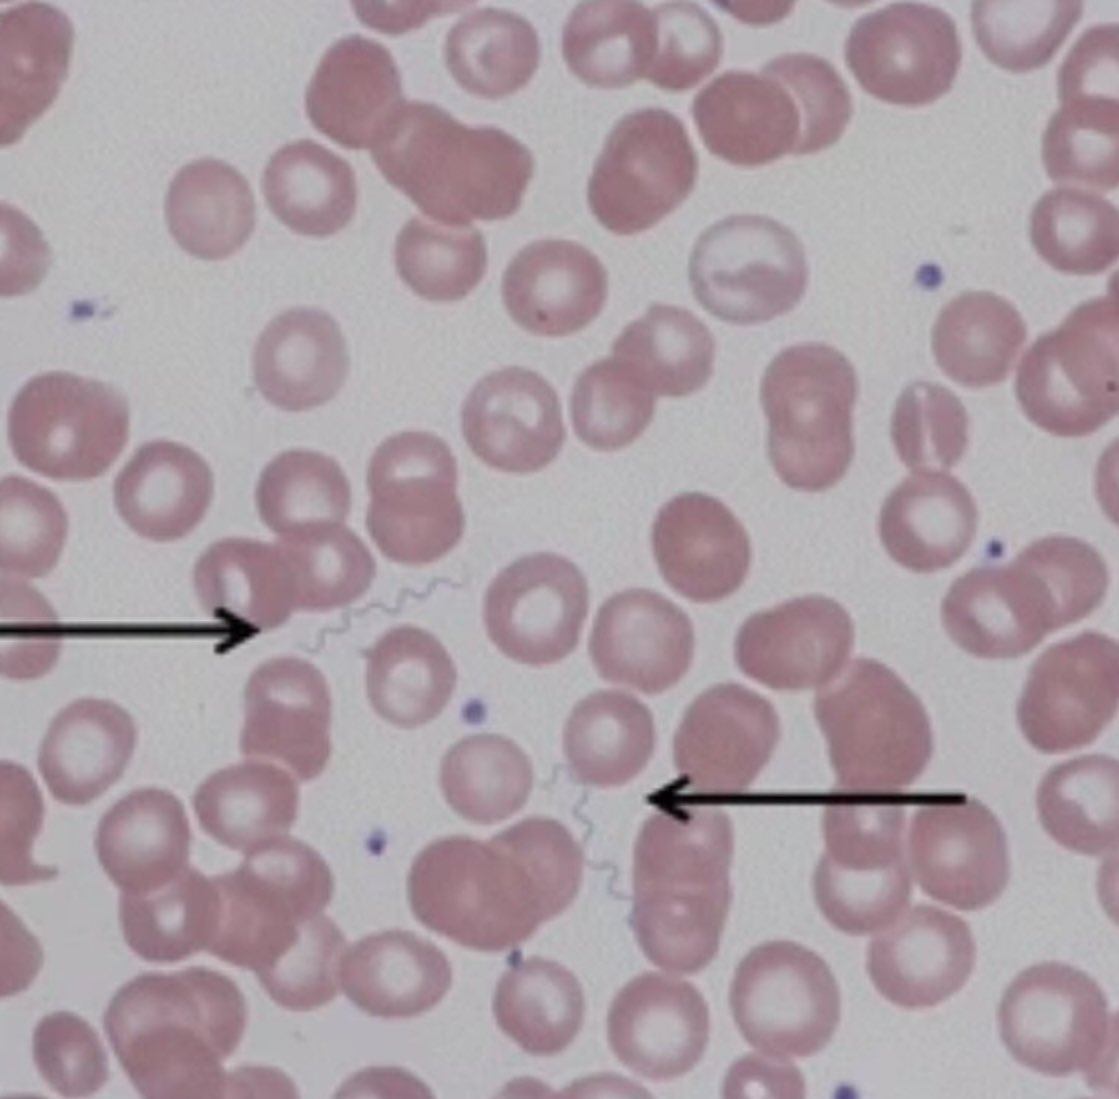 #idboardreview 30 M from Ethiopia in refugee camp x7d now arrived in Europe, has fever x3d f/b chills, dizziness, hepatomegaly, thrombocytopenia, ⬆️inflammatory markers. Blood smear shown. Dx? #medEd #idmedEd #IDtwitter #idxpost